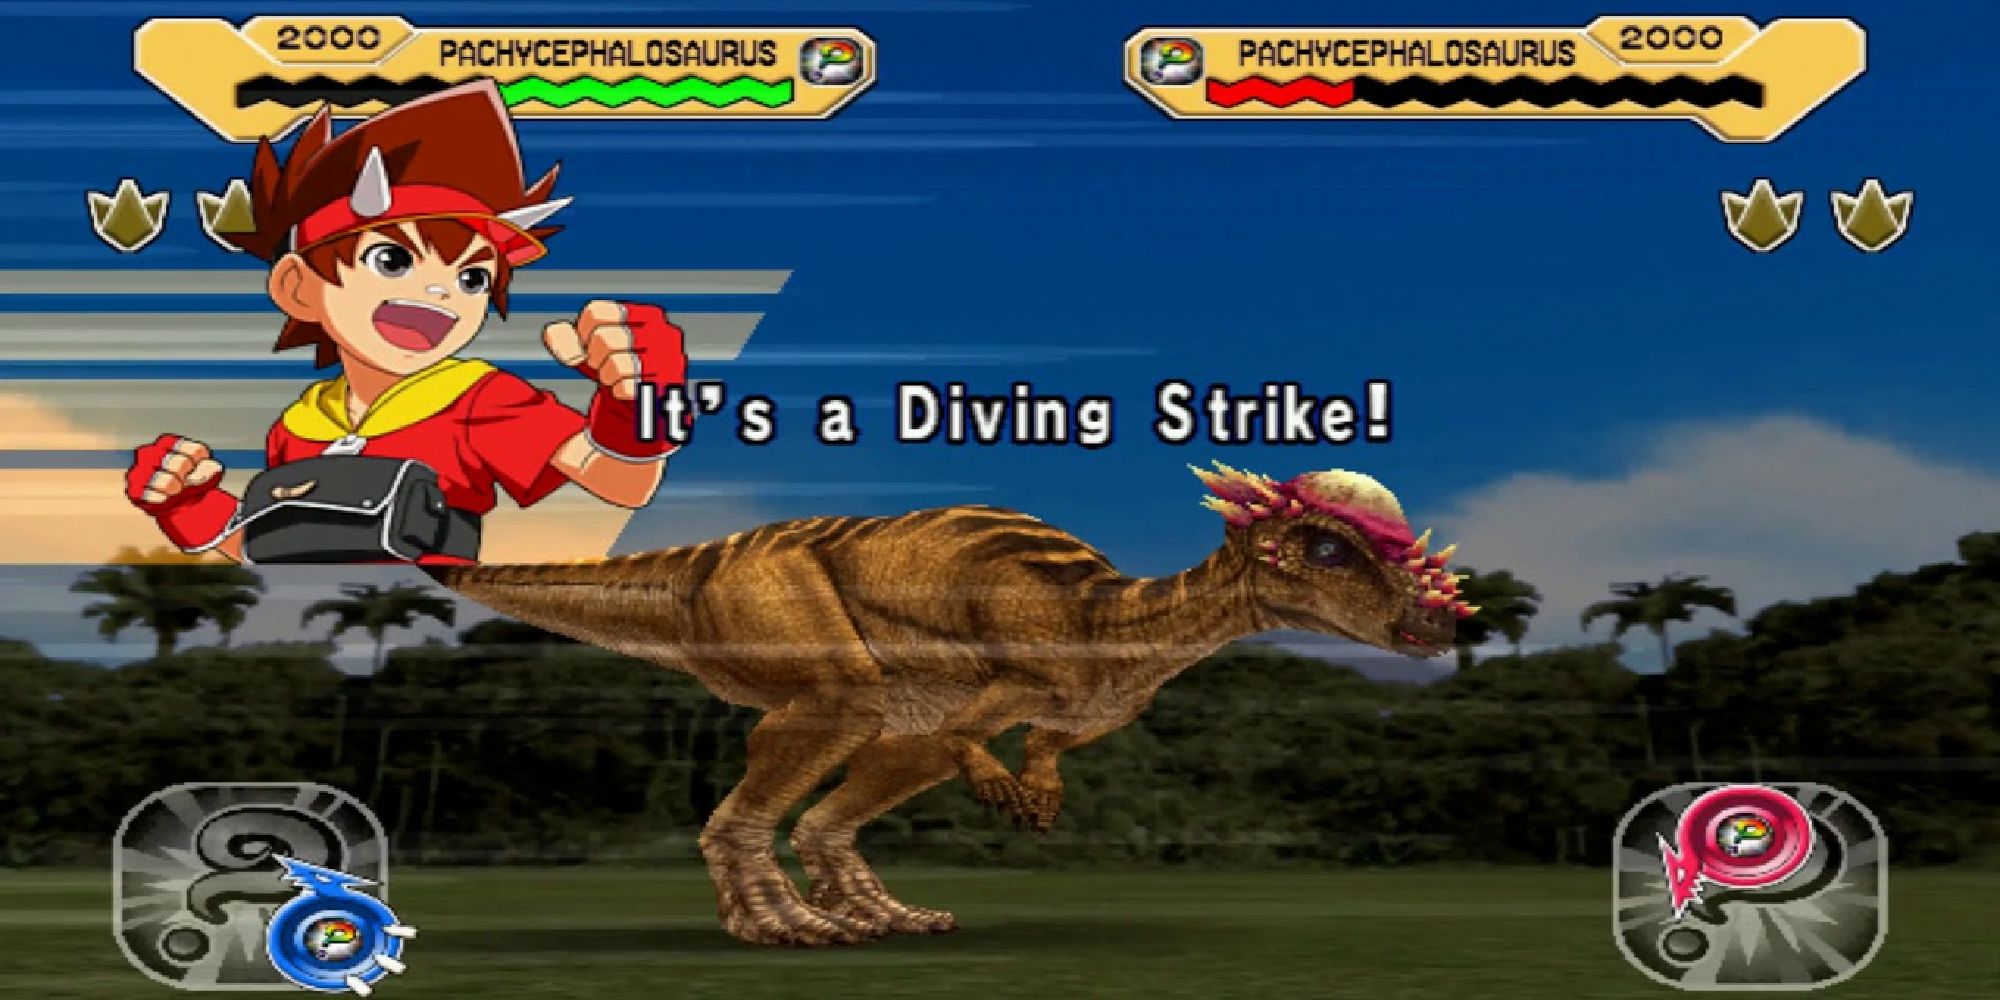 The battle screen of Dinosaur King for arcades showing a trainer commanding a Pachycephalosaurus to use a Diving Strike attack